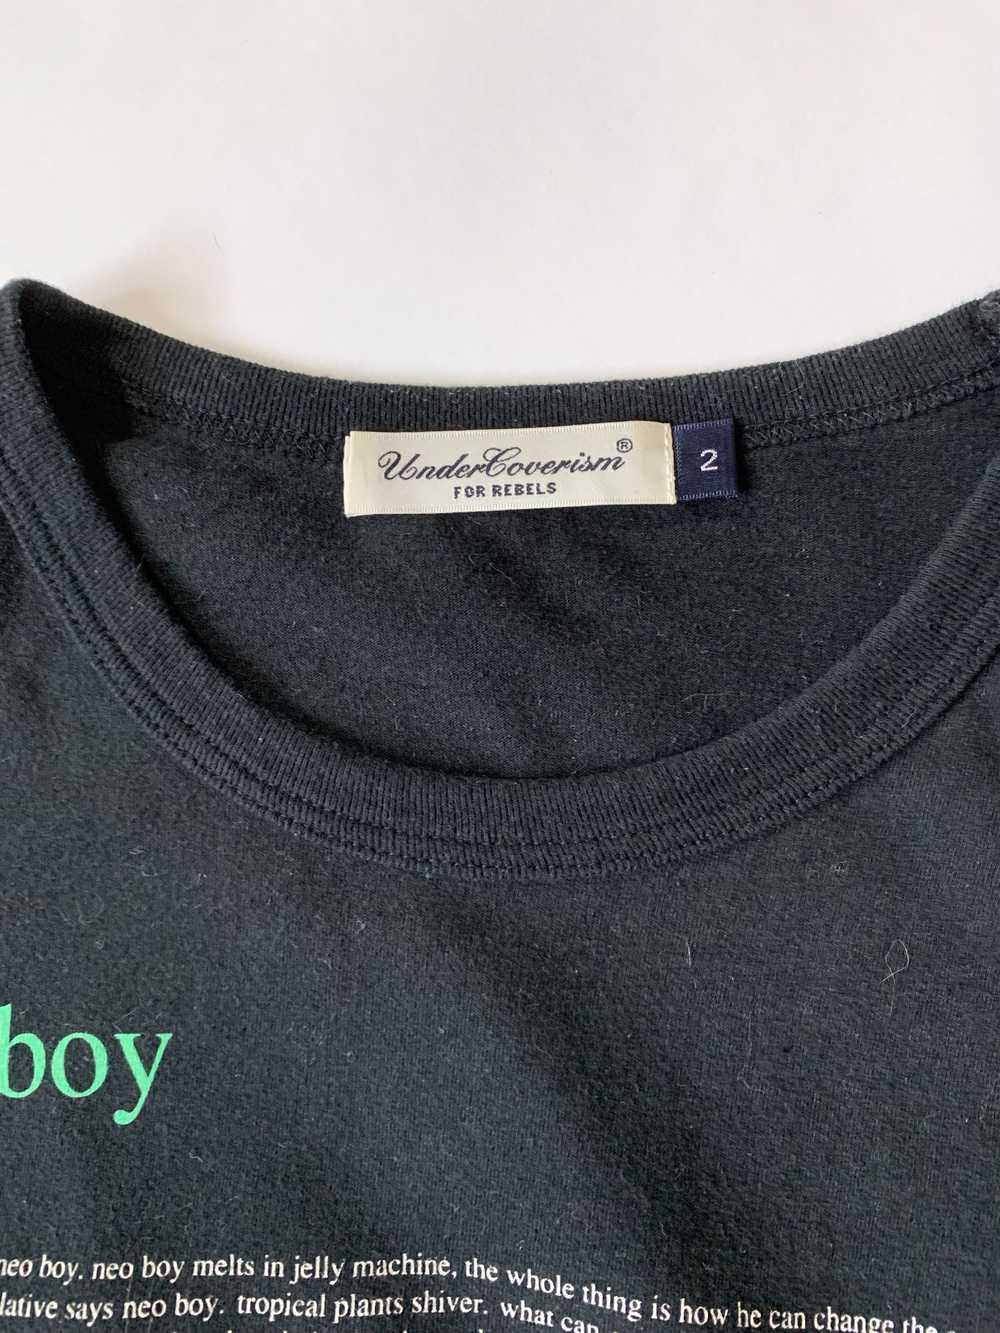 Undercover SS09 Neoboy Patti Smith Poem Tee - image 4